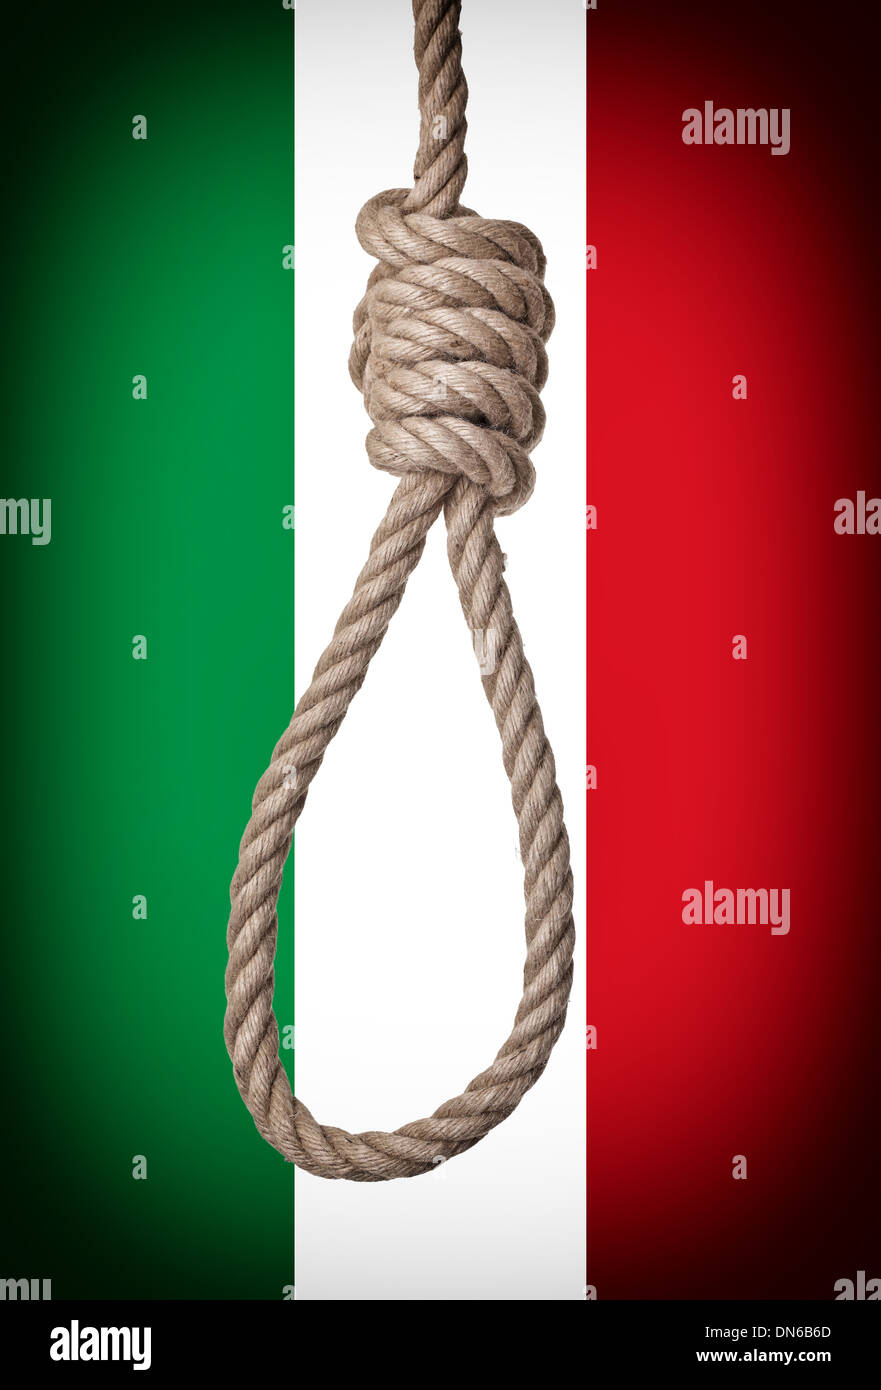 classic loop knot and italian flag background Stock Photo